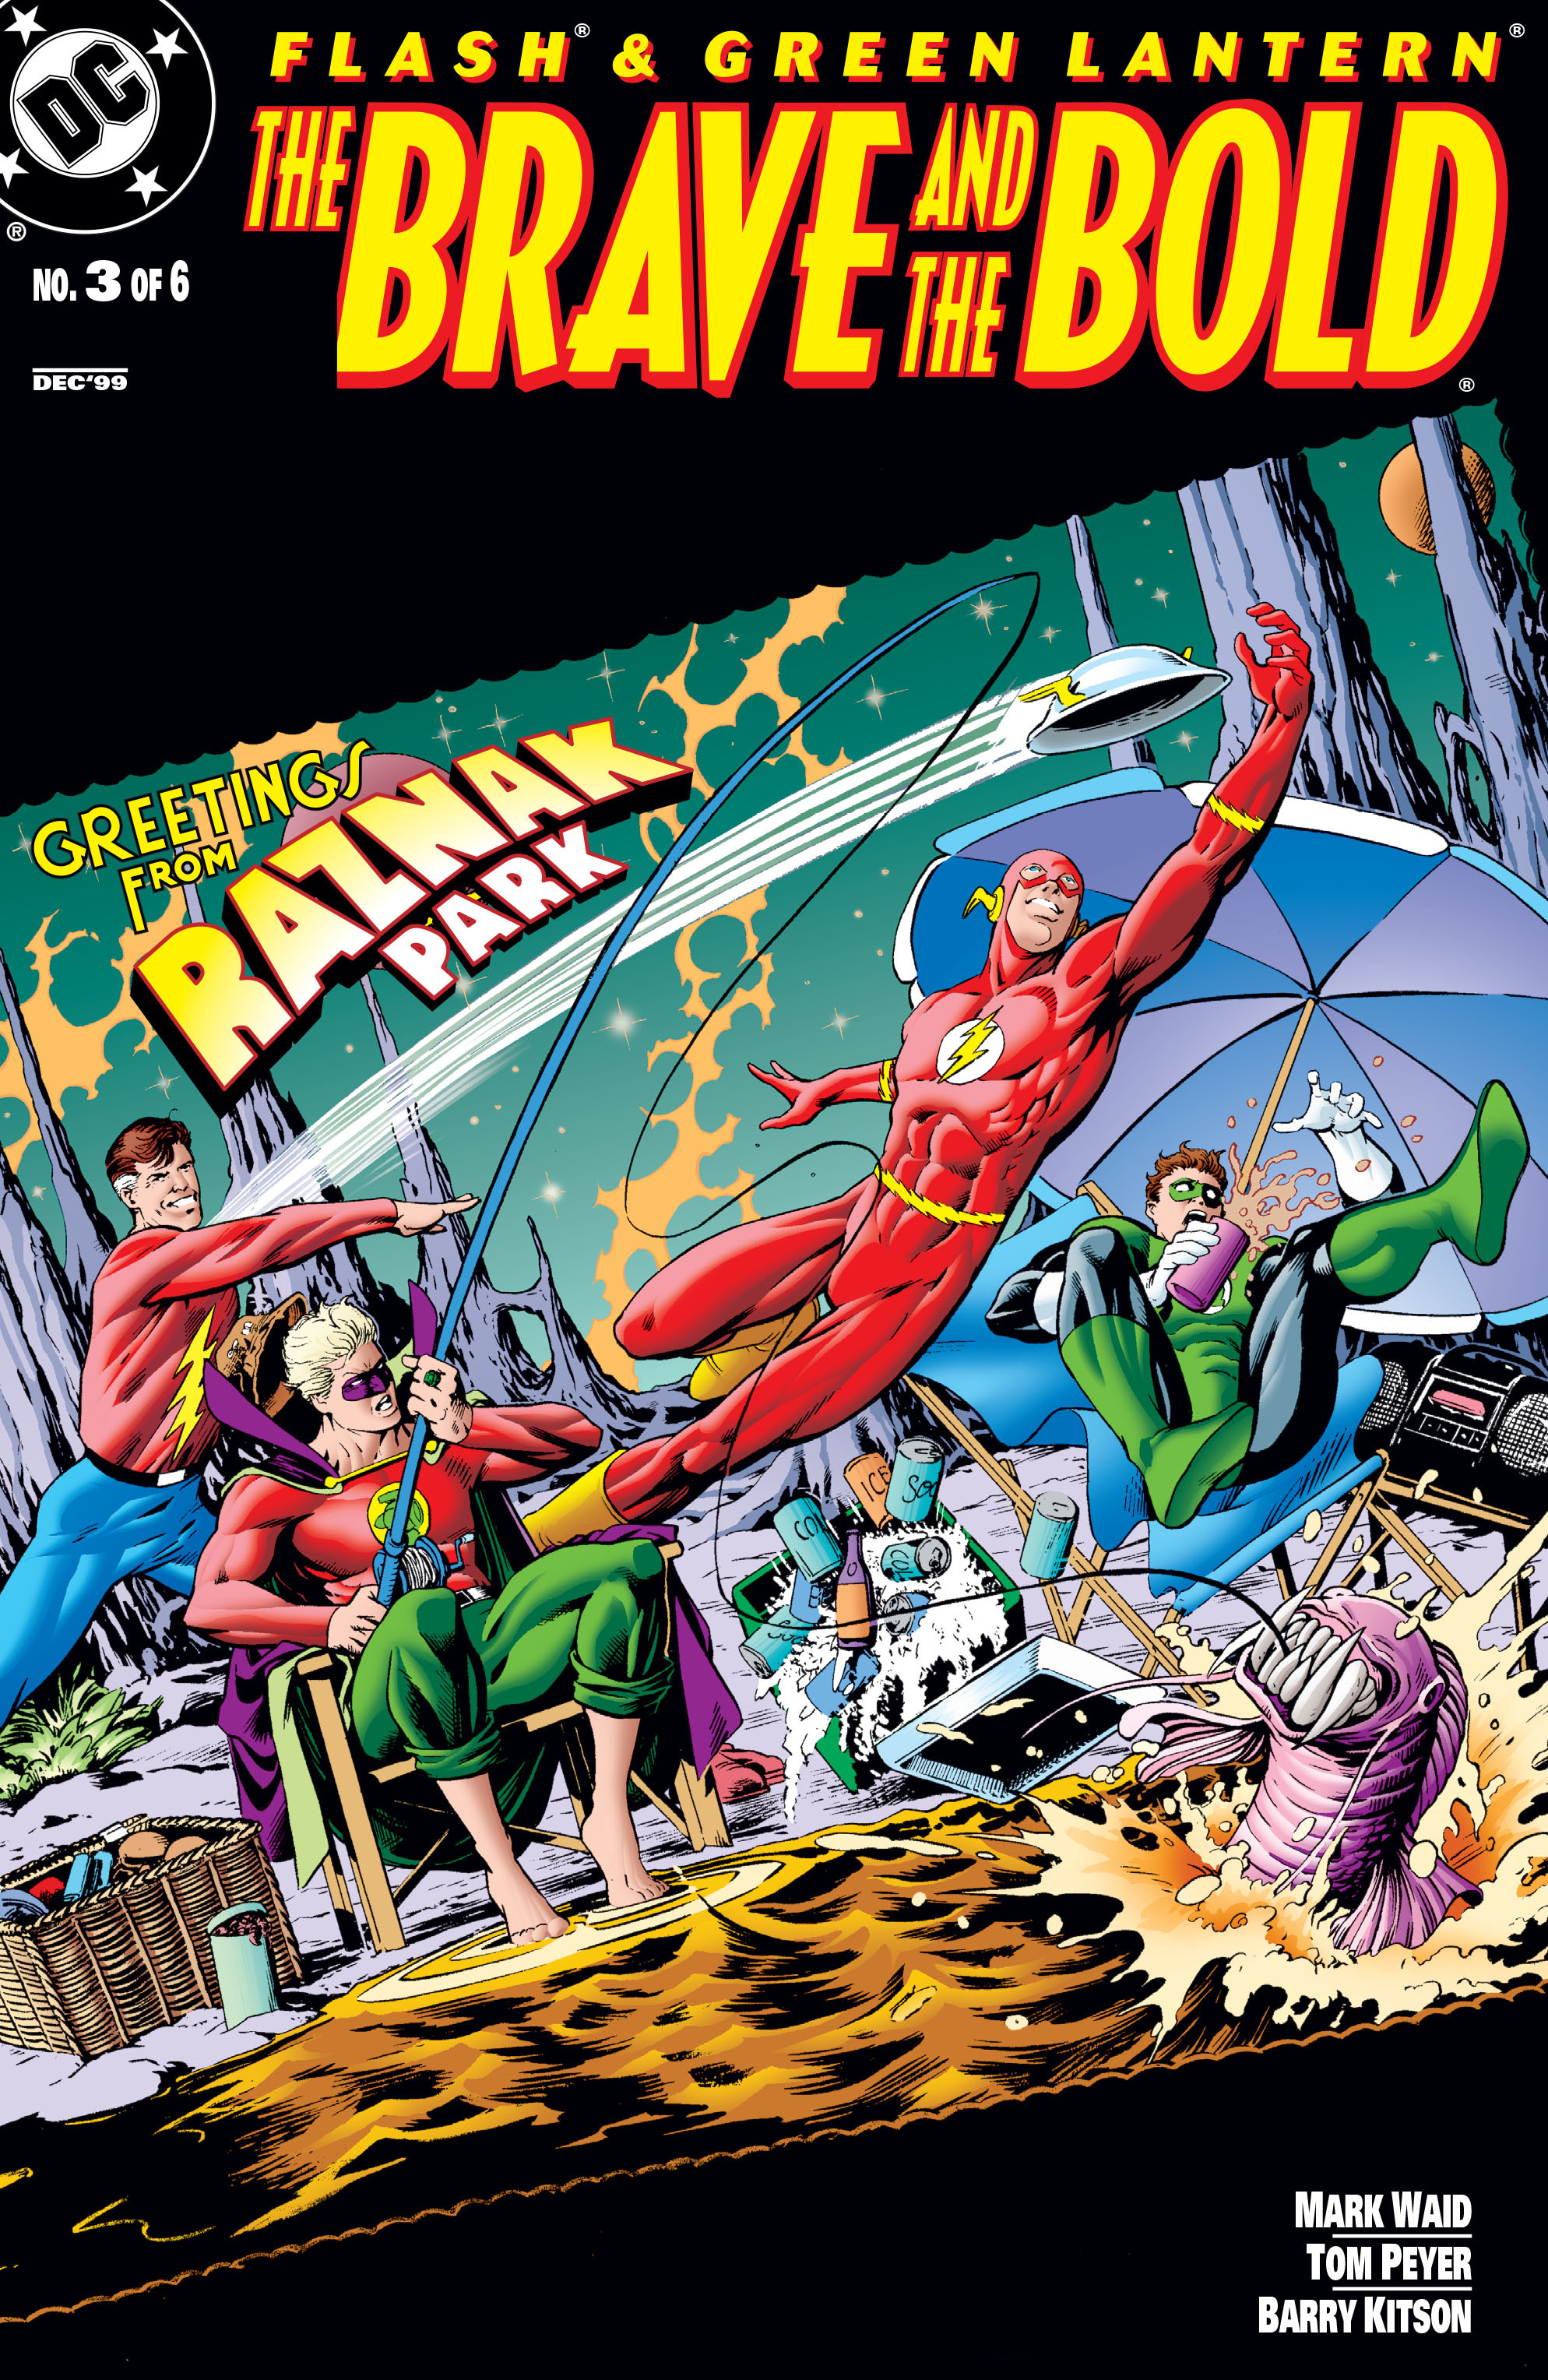 Flash & Green Lantern: The Brave and the Bold issue 3 - Page 1